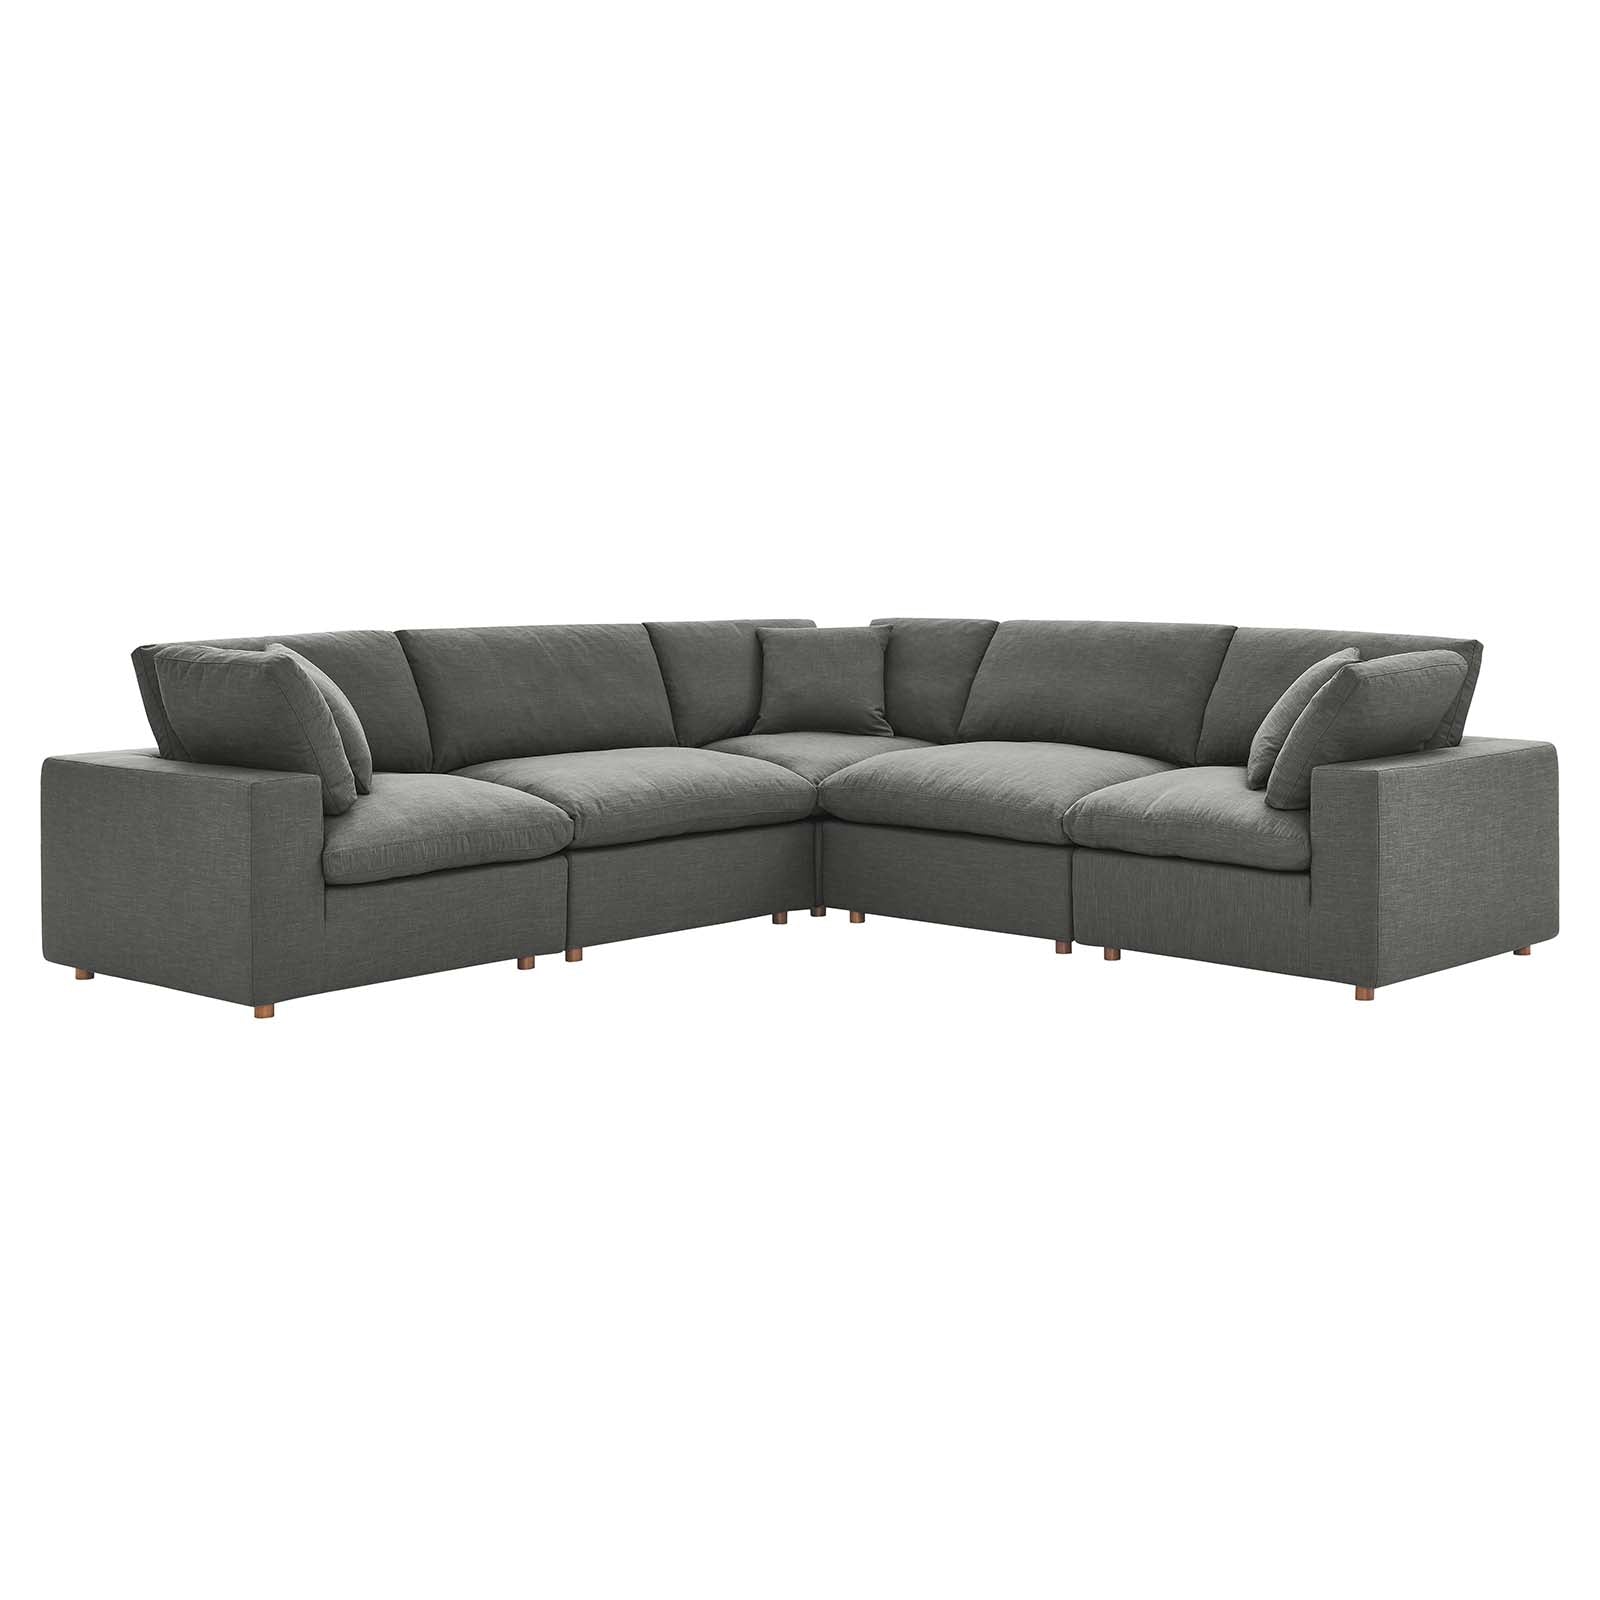 Modway Living Room Sets - Commix Down Filled Overstuffed 5 Piece 118" W Sectional Sofa Set Gray